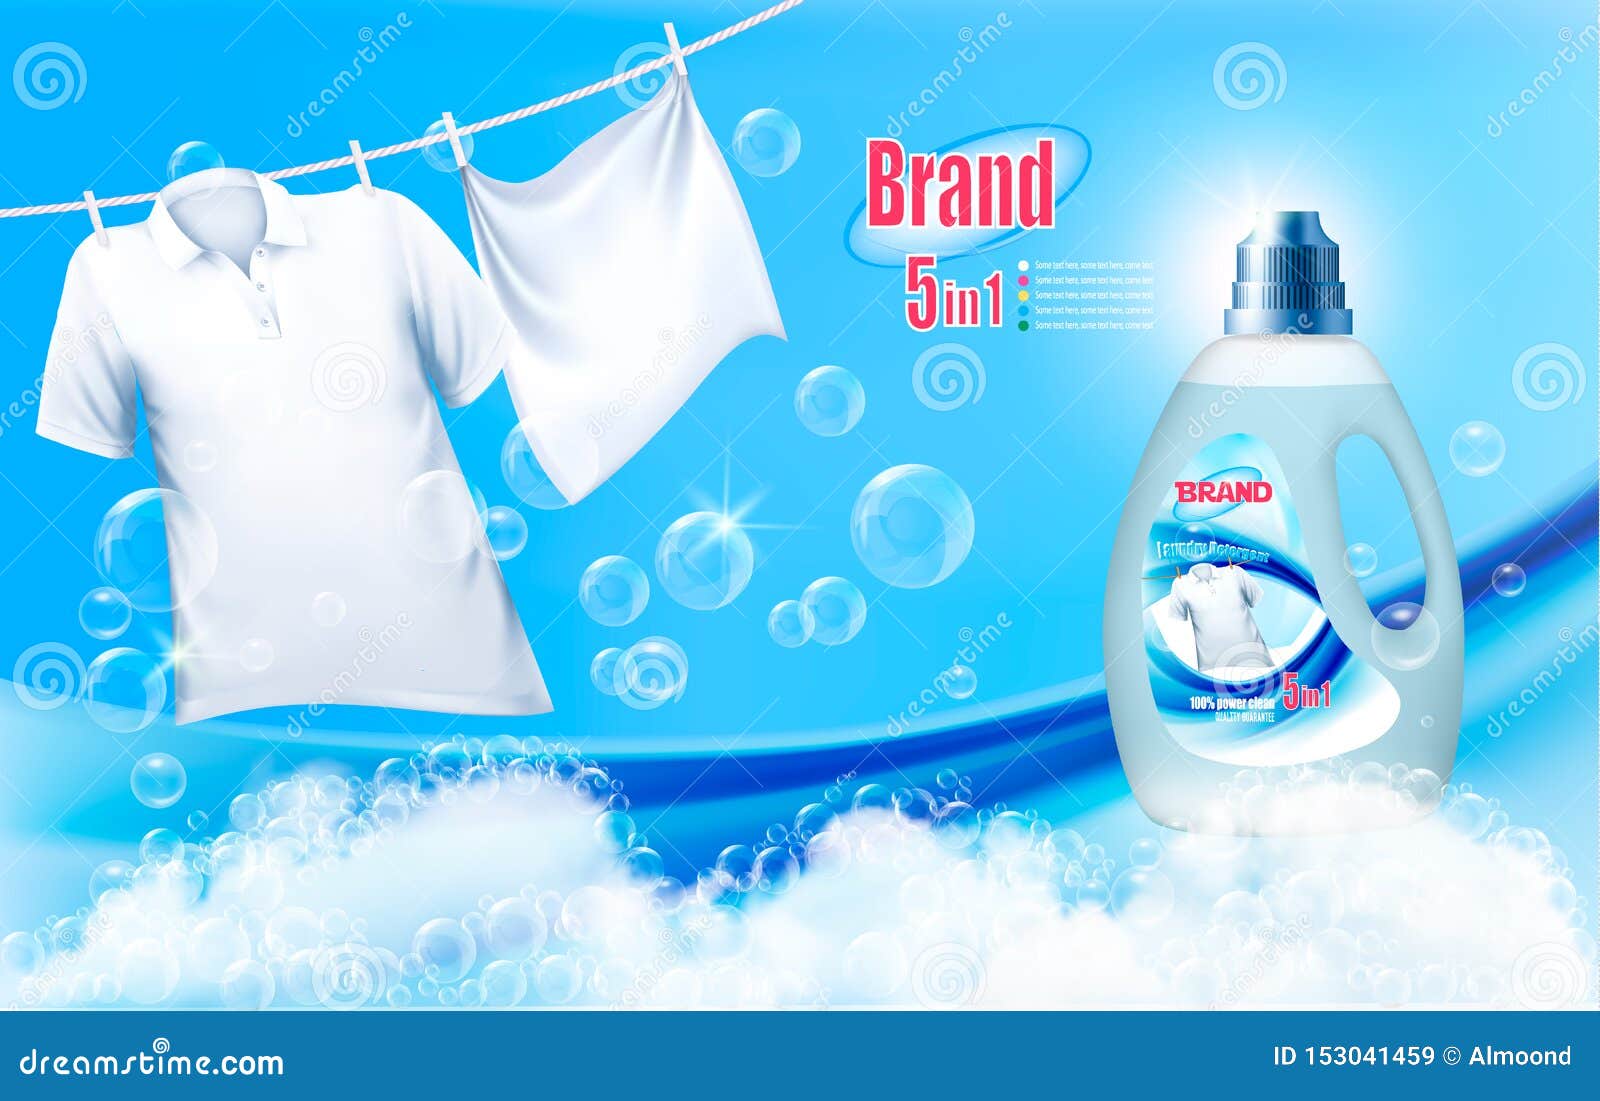 Laundry Detergent Ad. White Clothes Hanging on Rope and Soap Foam Bathe  Stock Vector - Illustration of fresh, bubble: 153041459